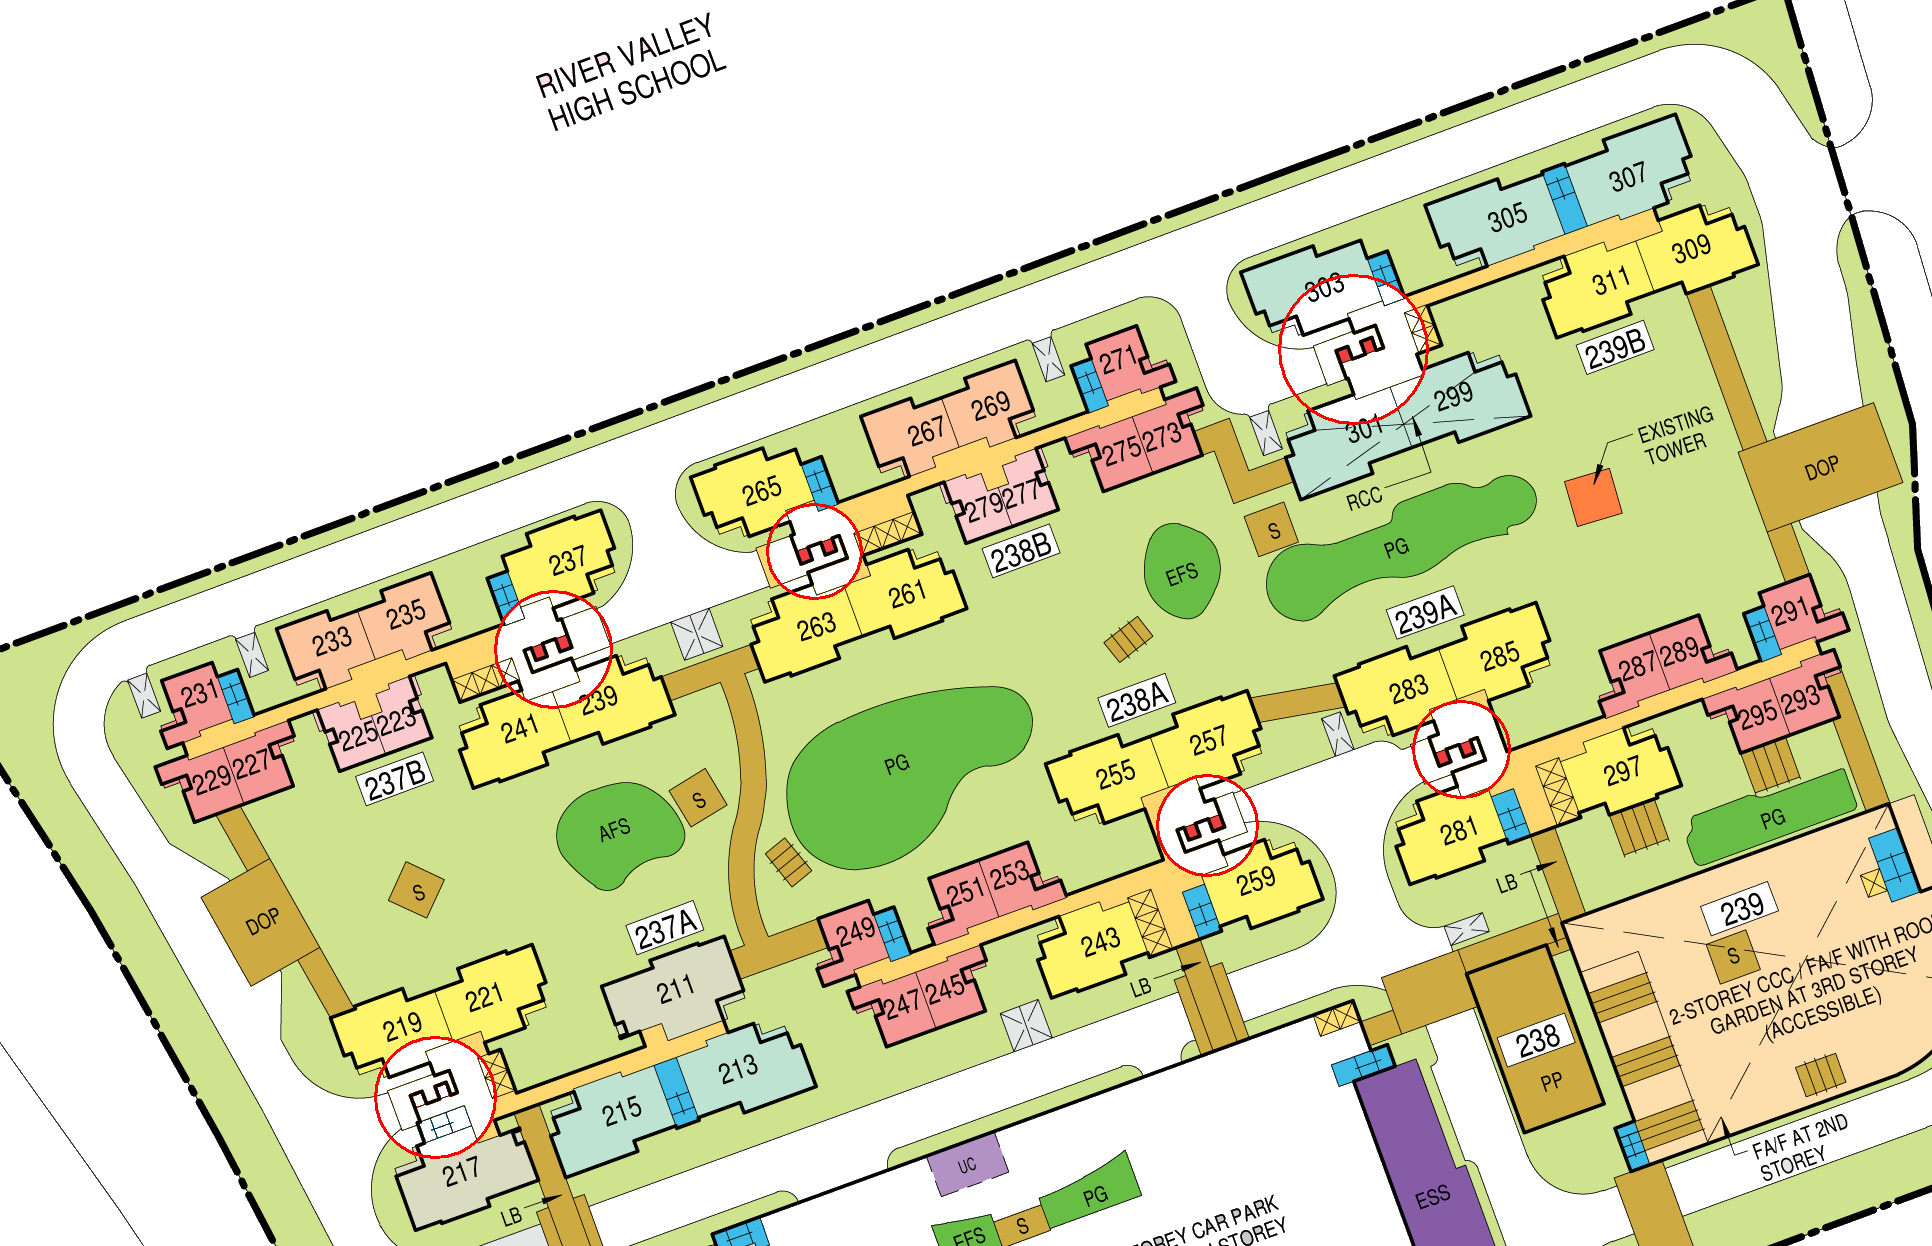 Hdb Boon Lay Glade Bto Launched In February 2019 Singapore Property Review Fengshui Geomancy Net